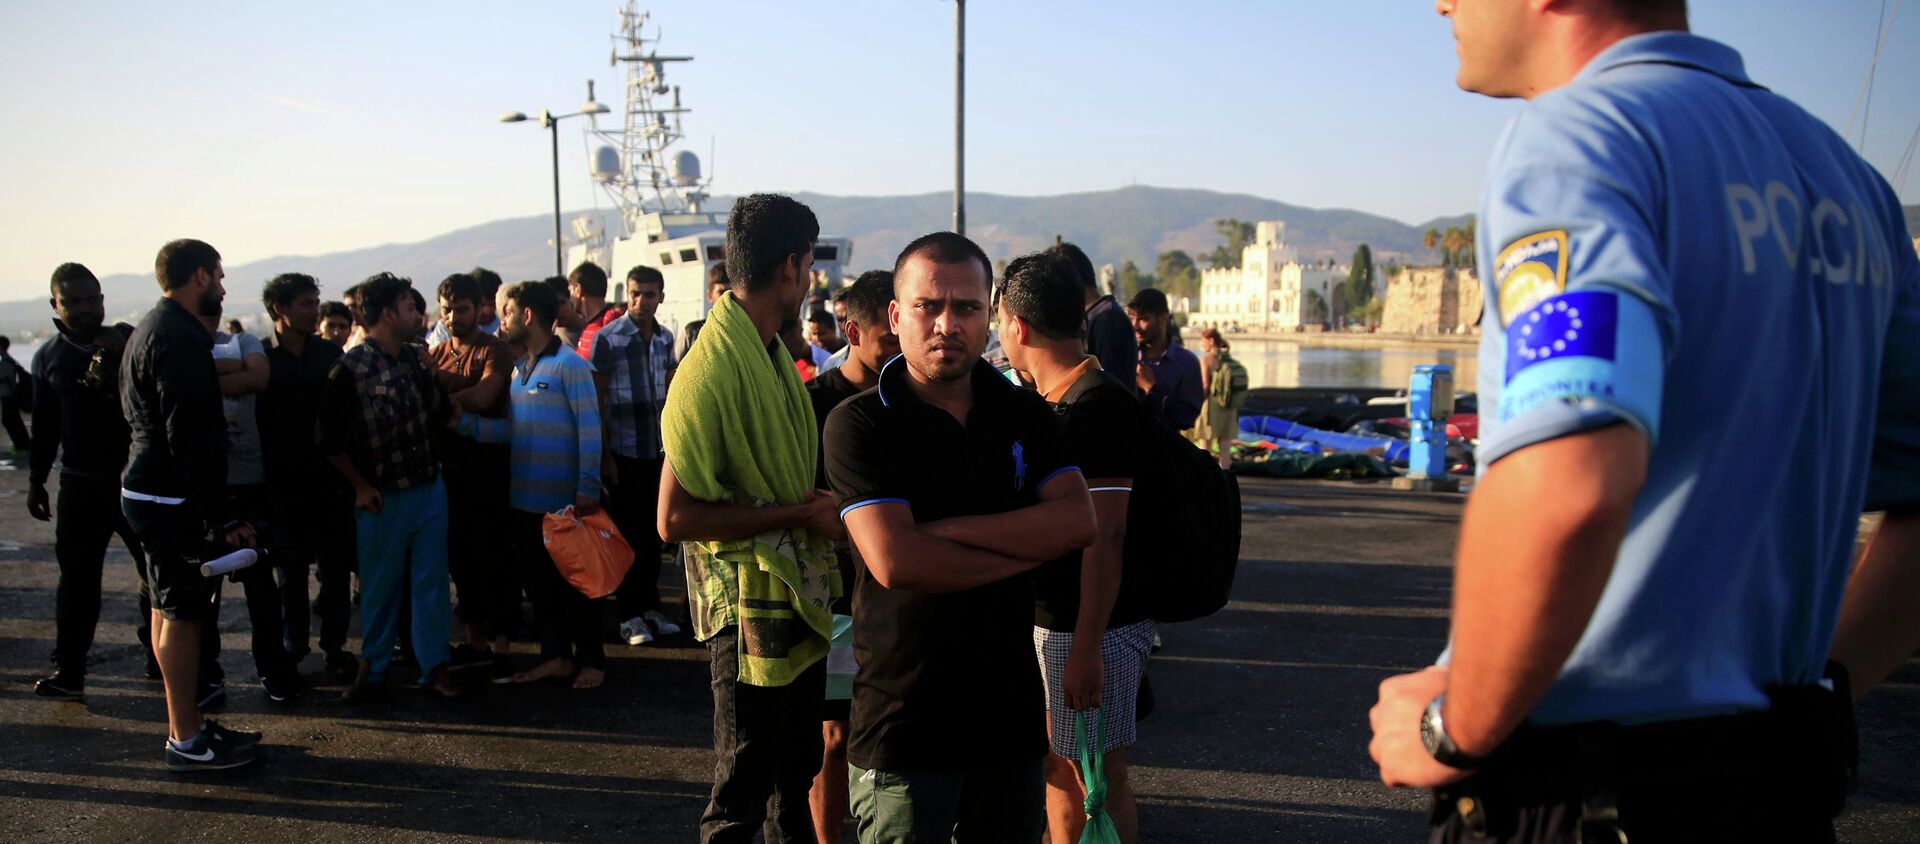 A migrant waits in line next to a Frontex officer (R) at the port of Kos, following a rescue operation off the Greek island of Kos, August 14, 2015 - Sputnik International, 1920, 02.11.2018